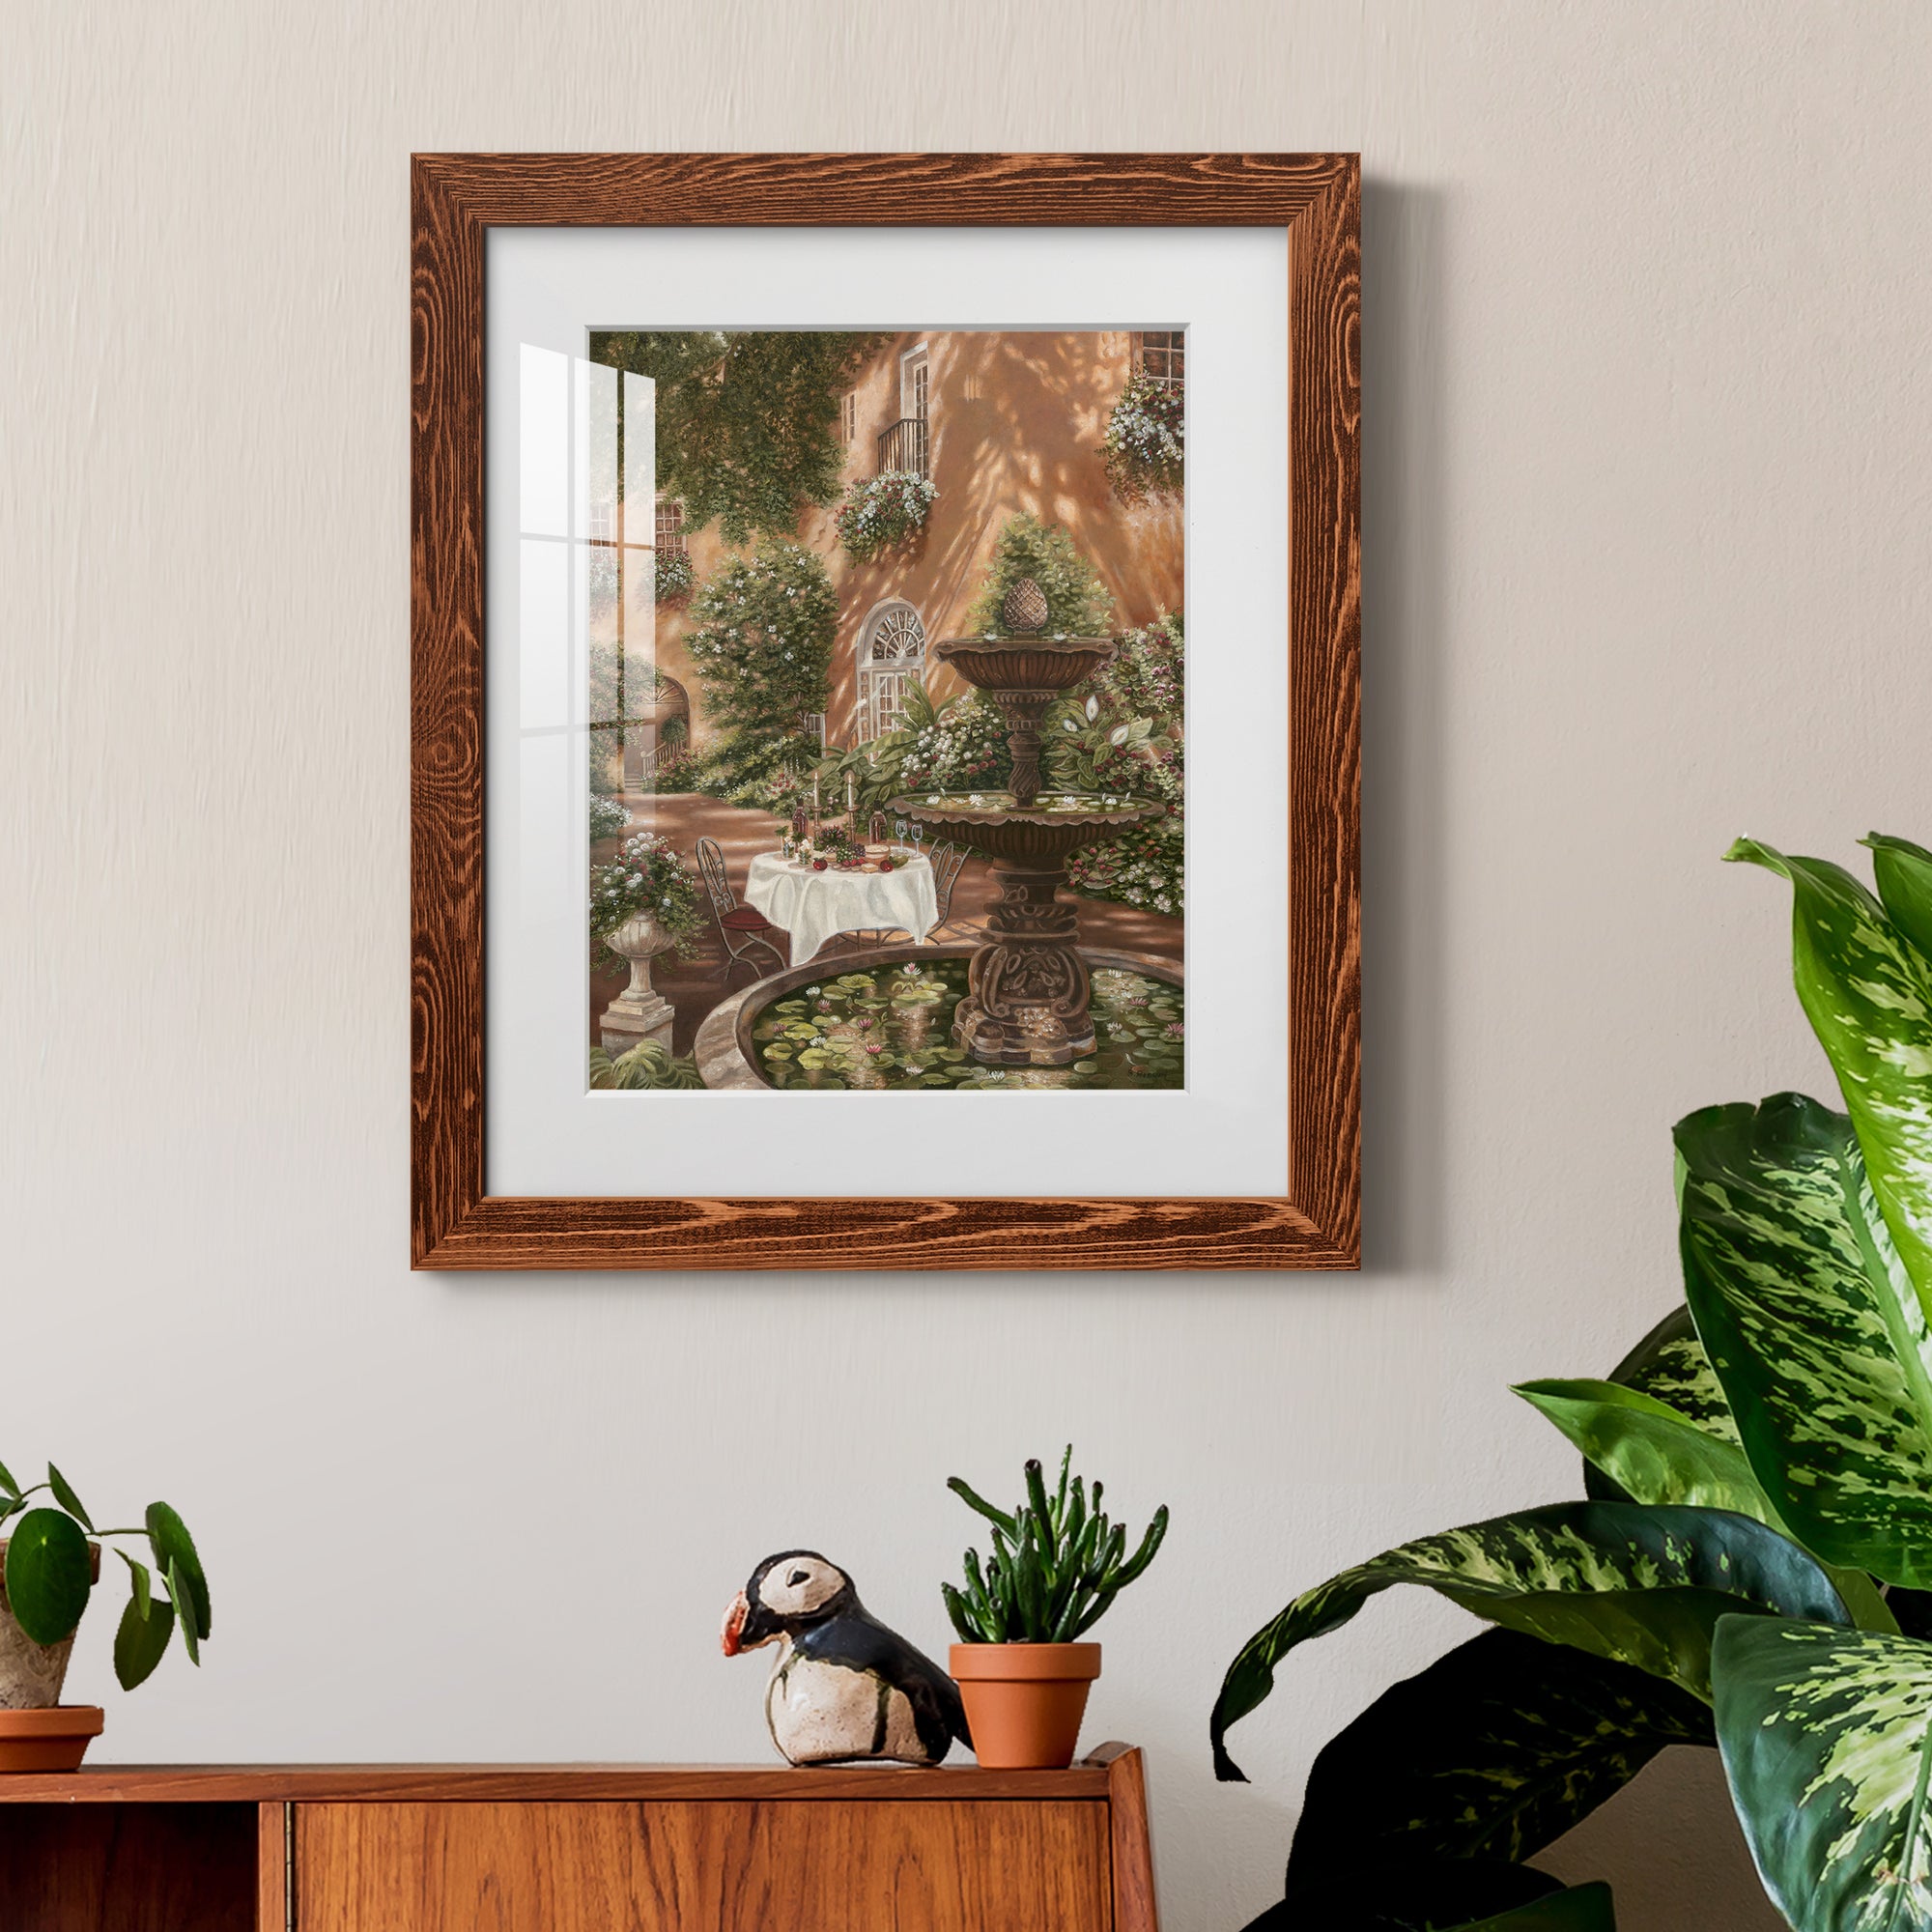 Evening Cocktails II - Premium Framed Print - Distressed Barnwood Frame - Ready to Hang